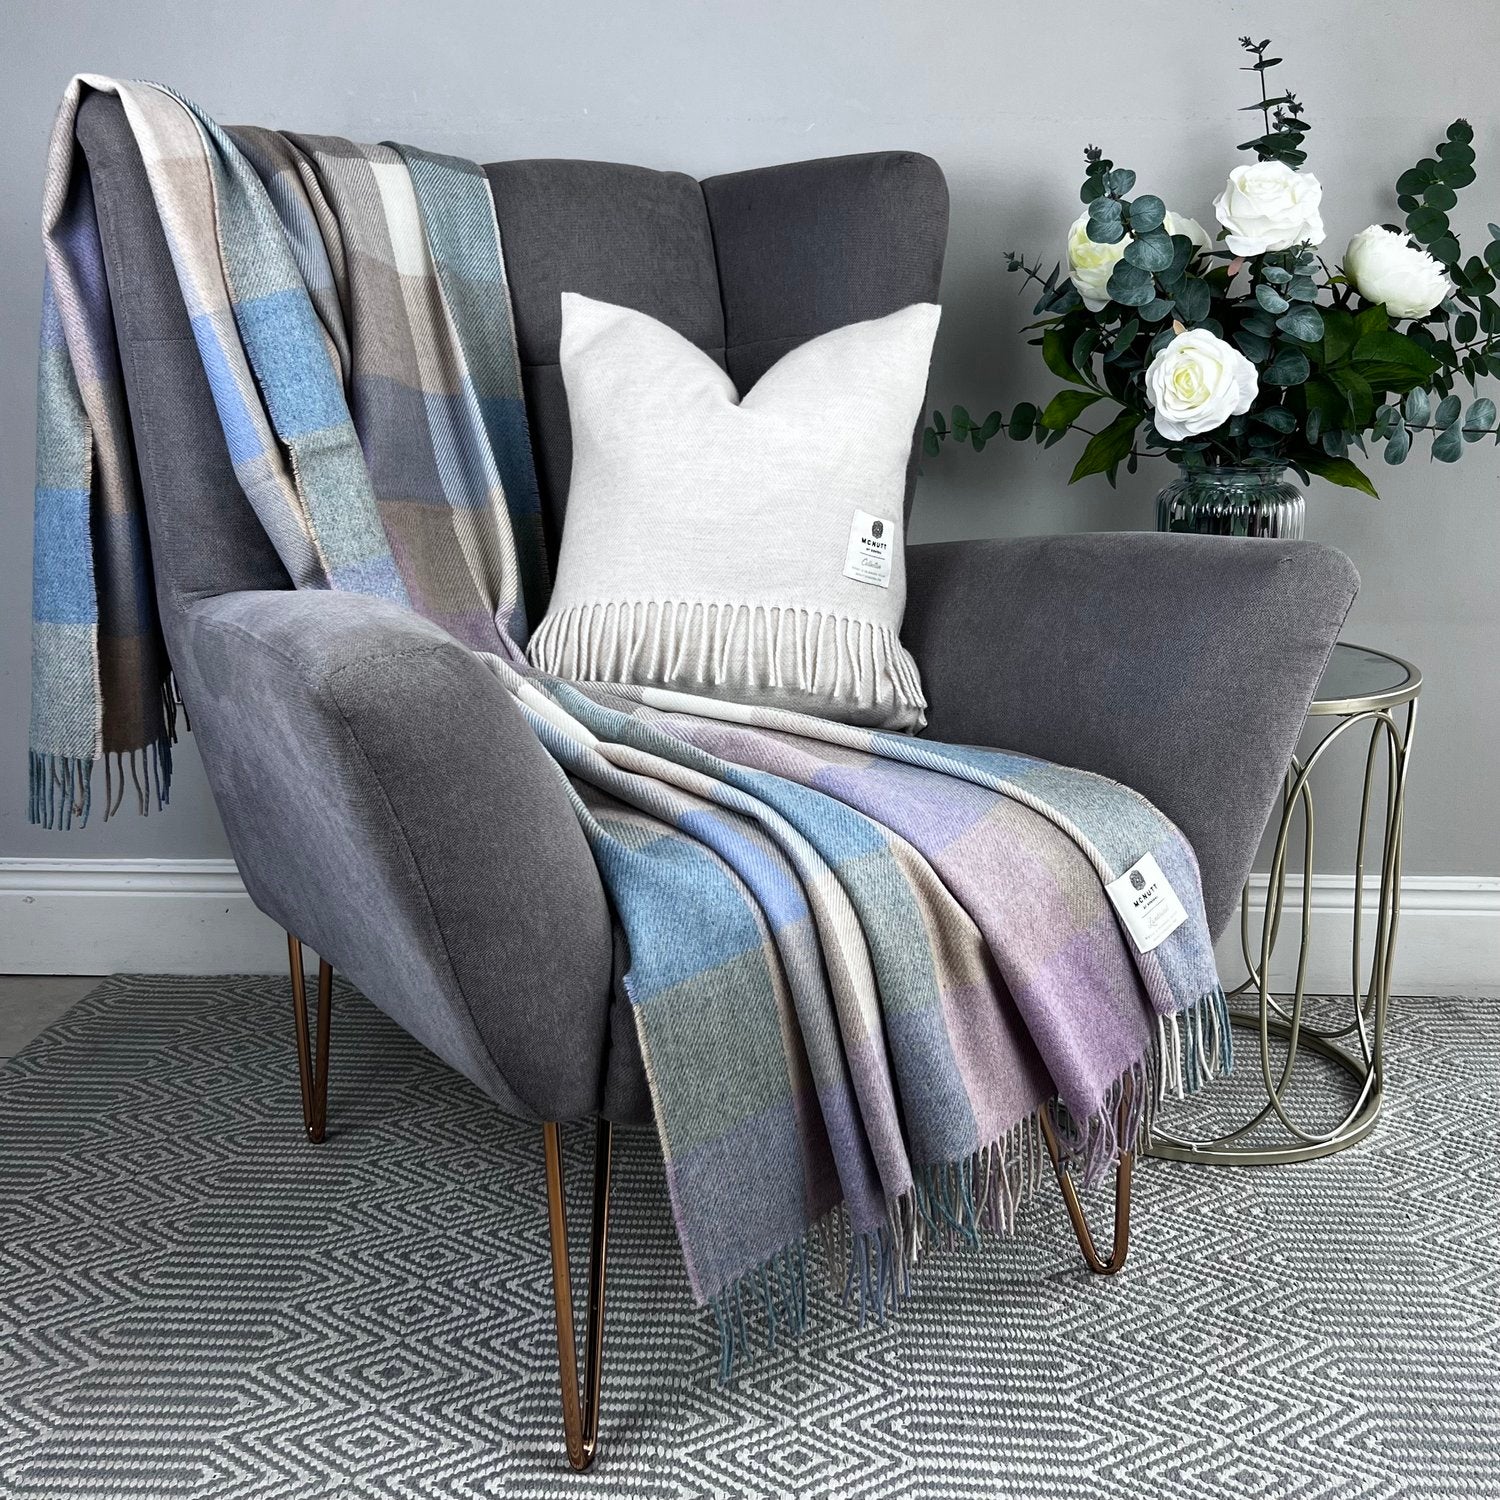 McNutt of Donegal, Supersoft Throw - Coastal Check